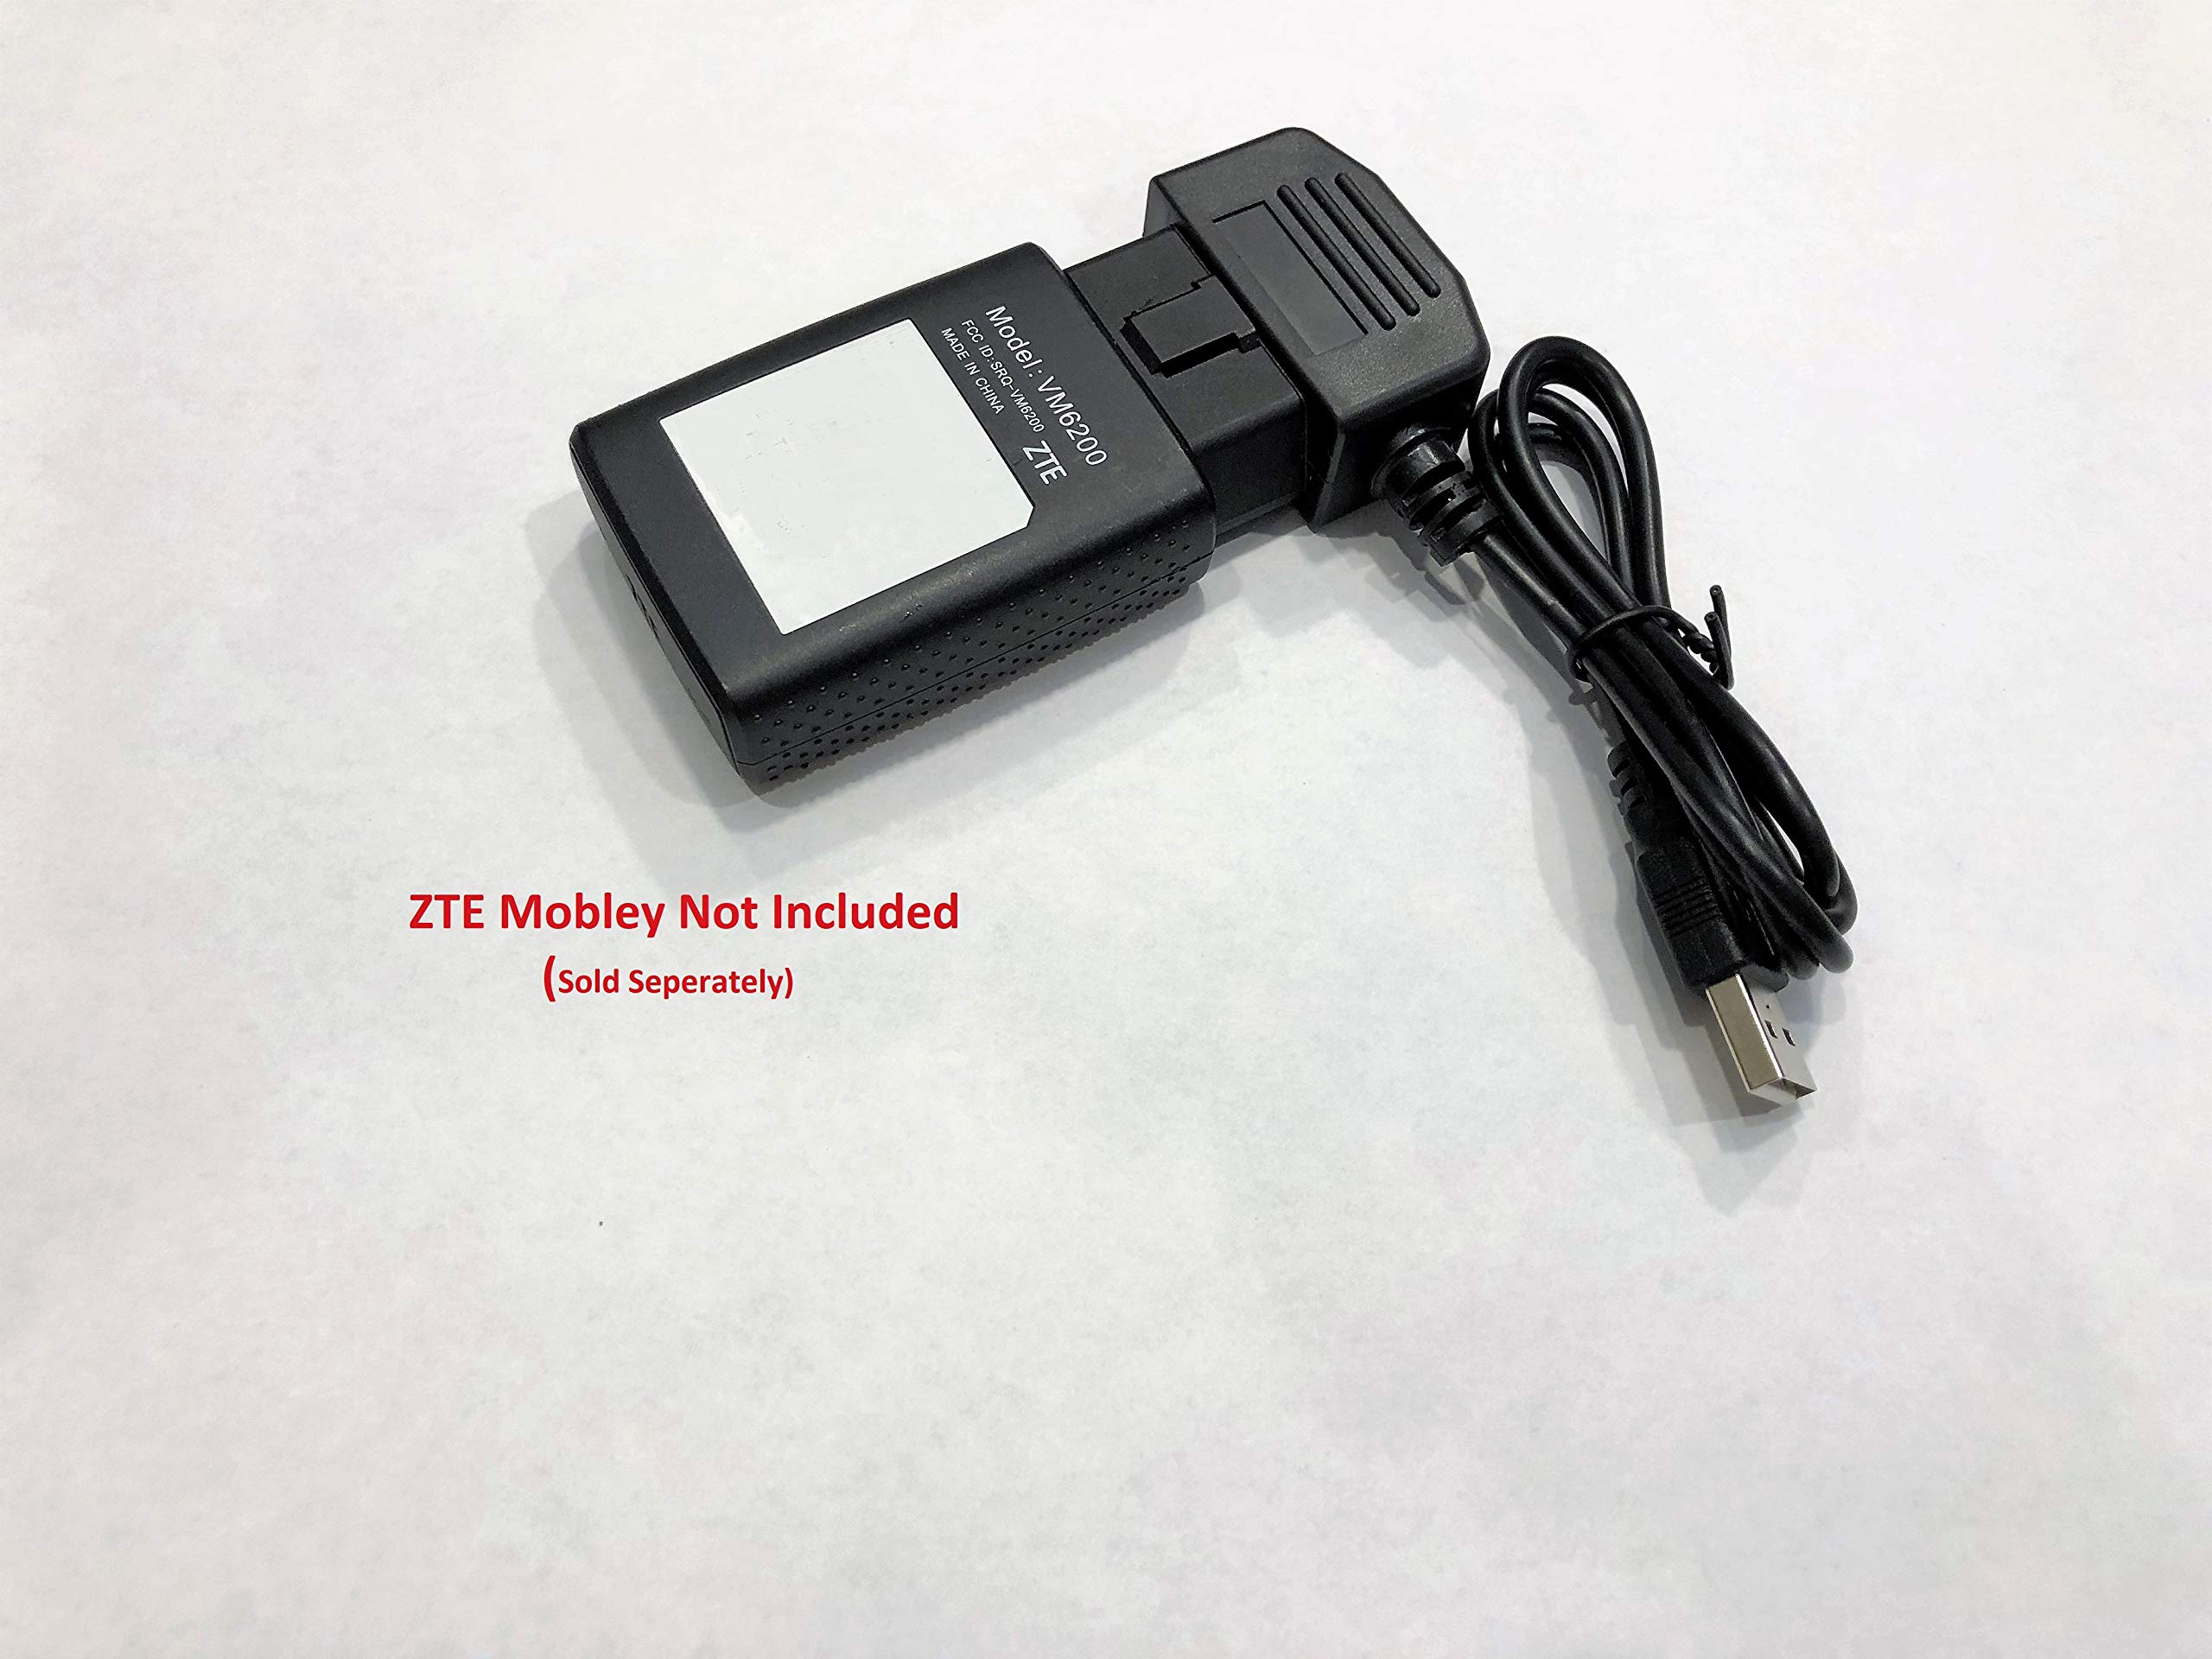 High Power 14.5V USB Mobley Adapter by Vegajf Compatibale with AT&T ZTE Mobley OBD Hotspot